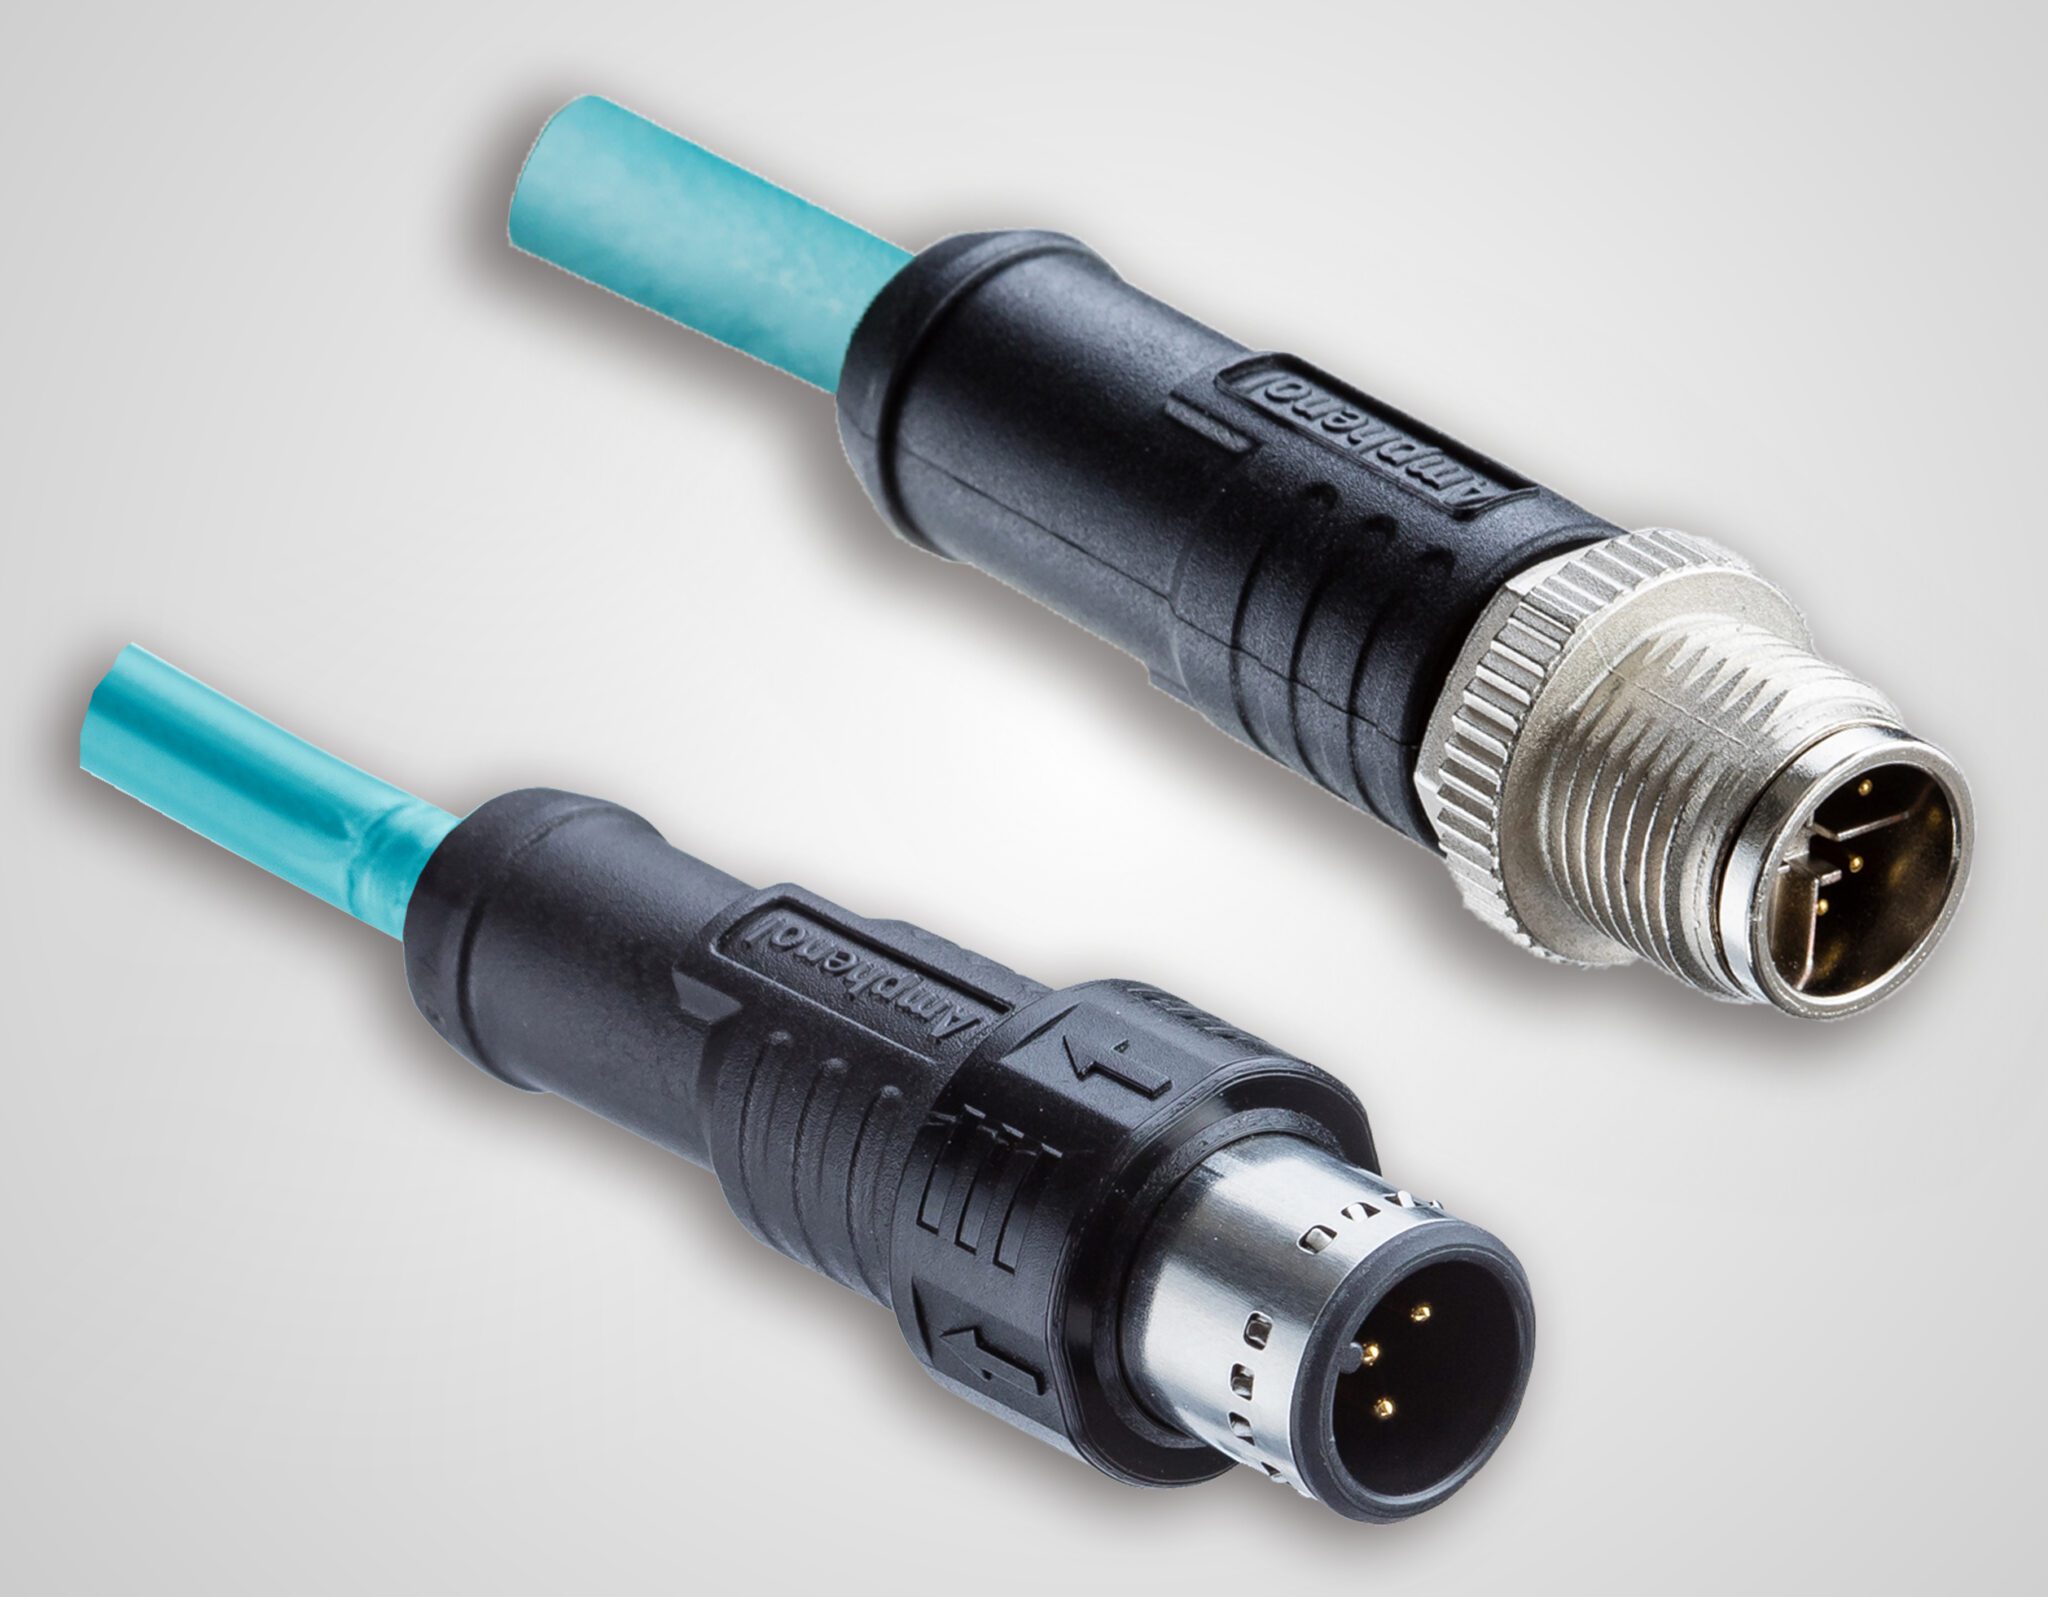 Amphenol LTW’s M12 X-Code connectors and cable assemblies